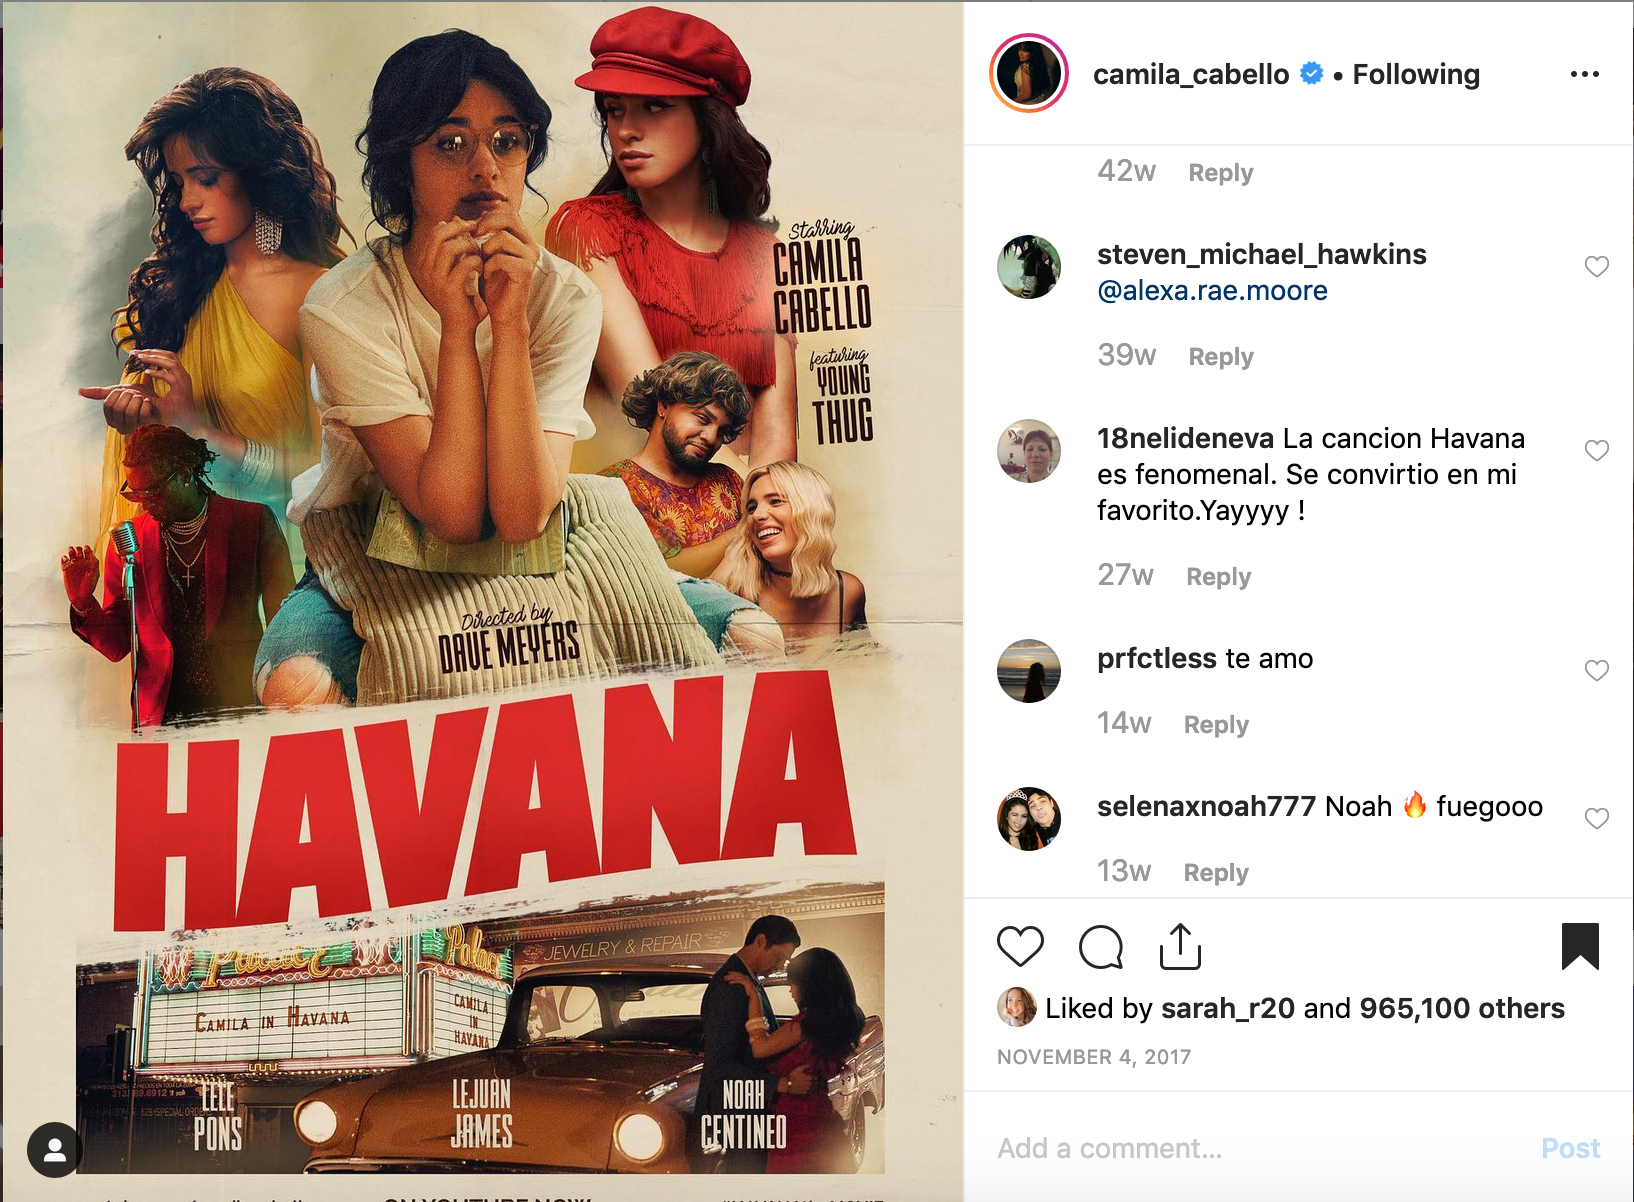 From Bananas to Buttocks: The Latina Body in Popular Film and Culture